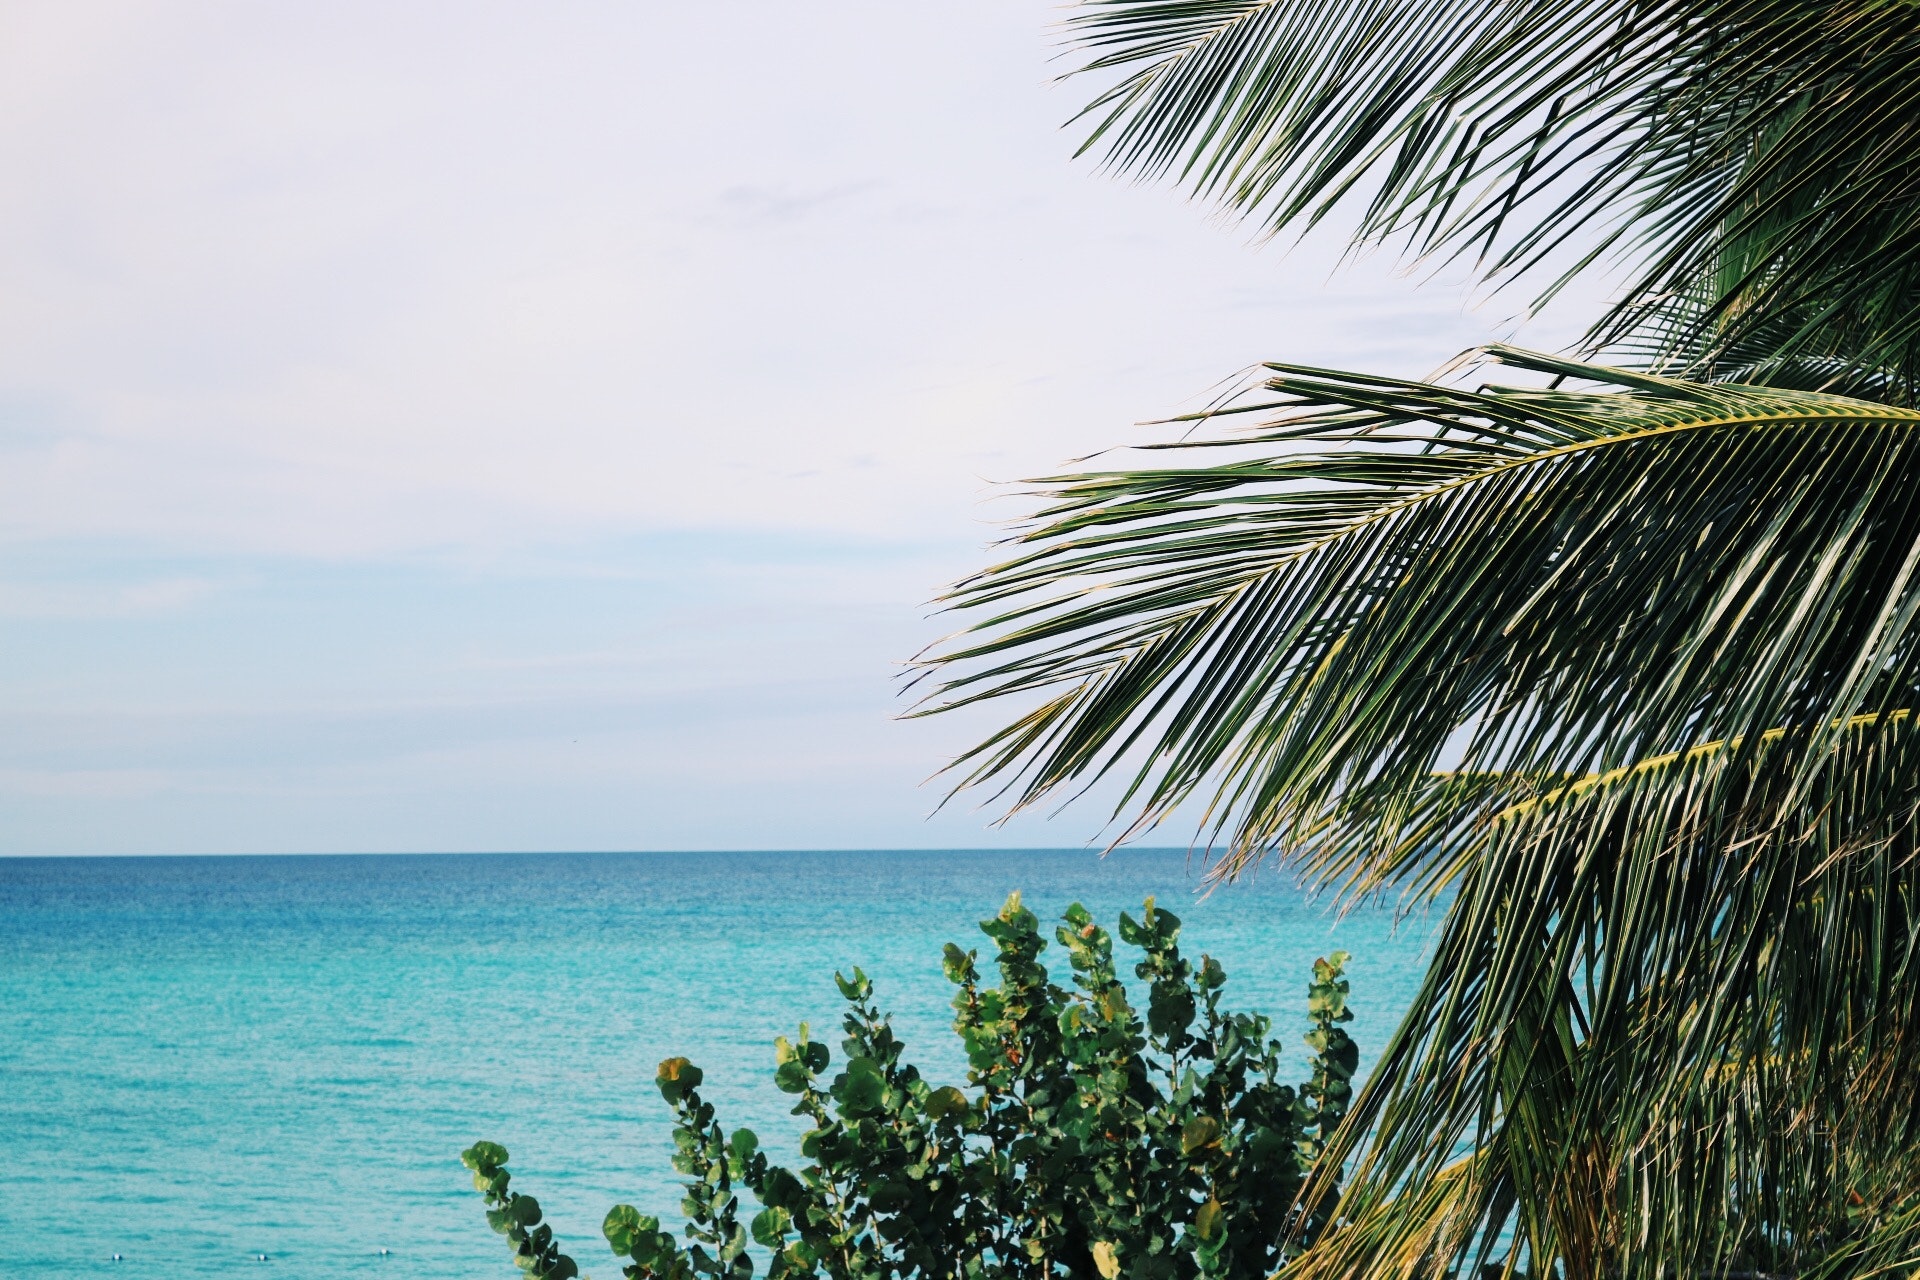 Palm Trees and Green Leaf Plant Near Body of Water, Beach, Sea, Vacation, Tropical, HQ Photo